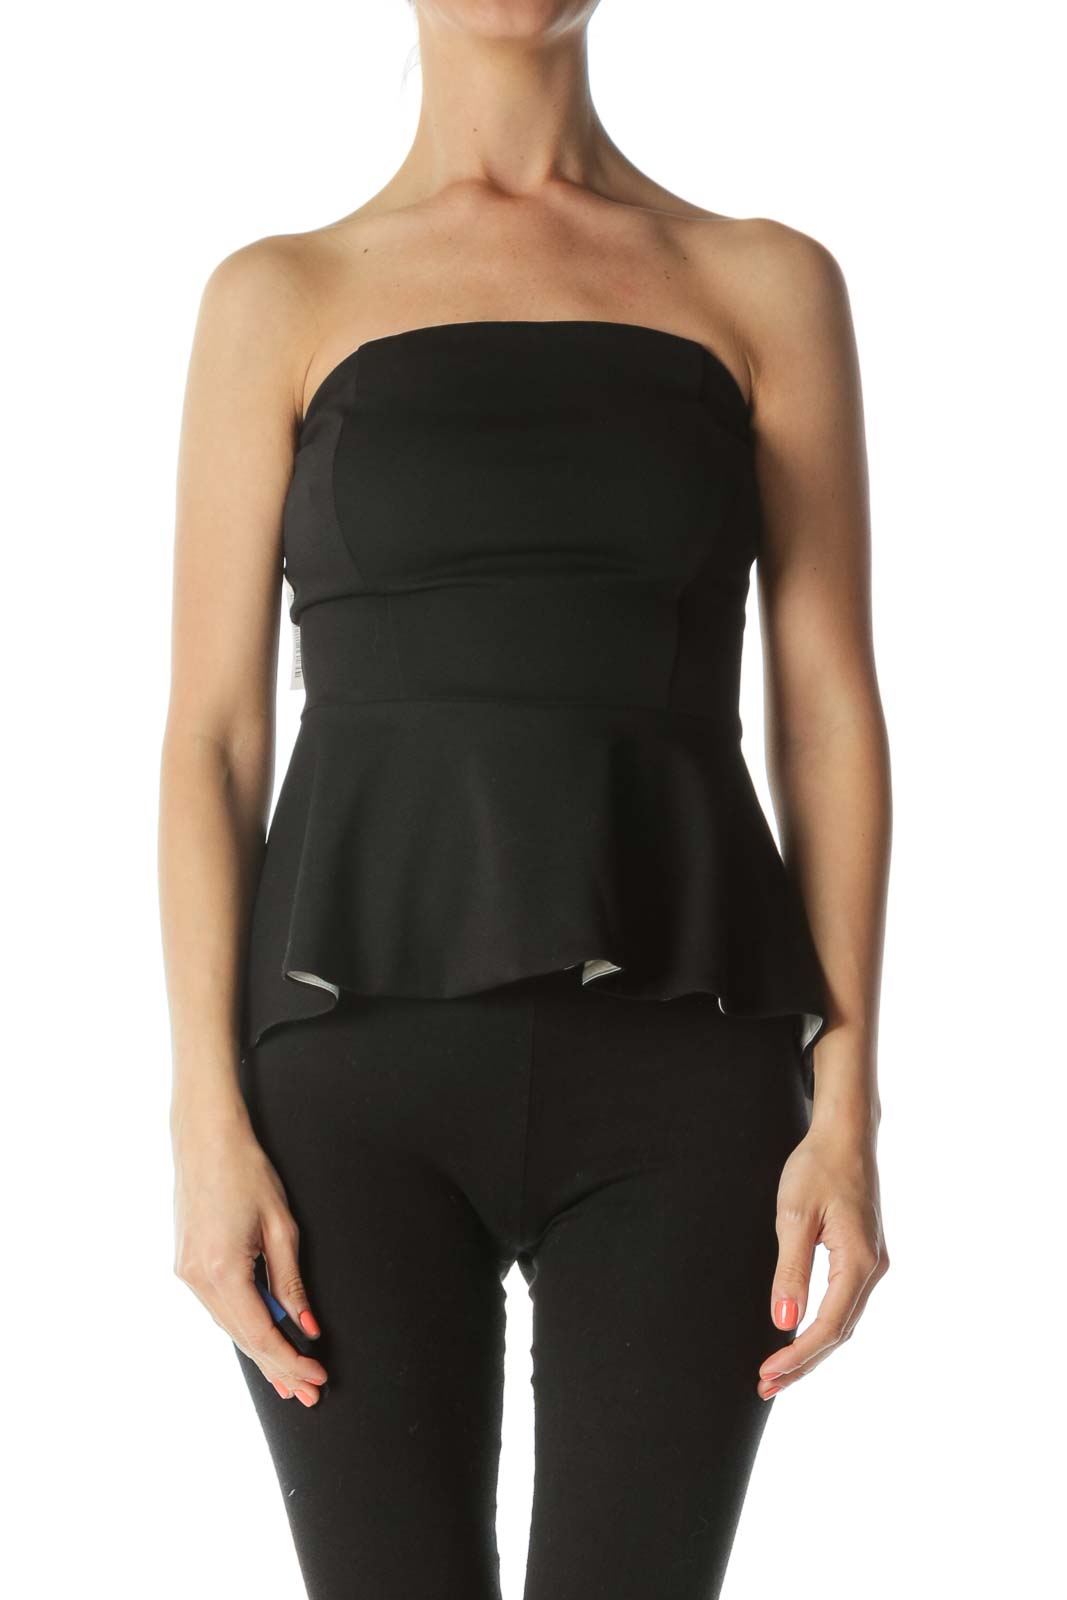 Black/Cream Strapless High-Low Peplum Top with Inside-Stick-On-Trim Aid Front